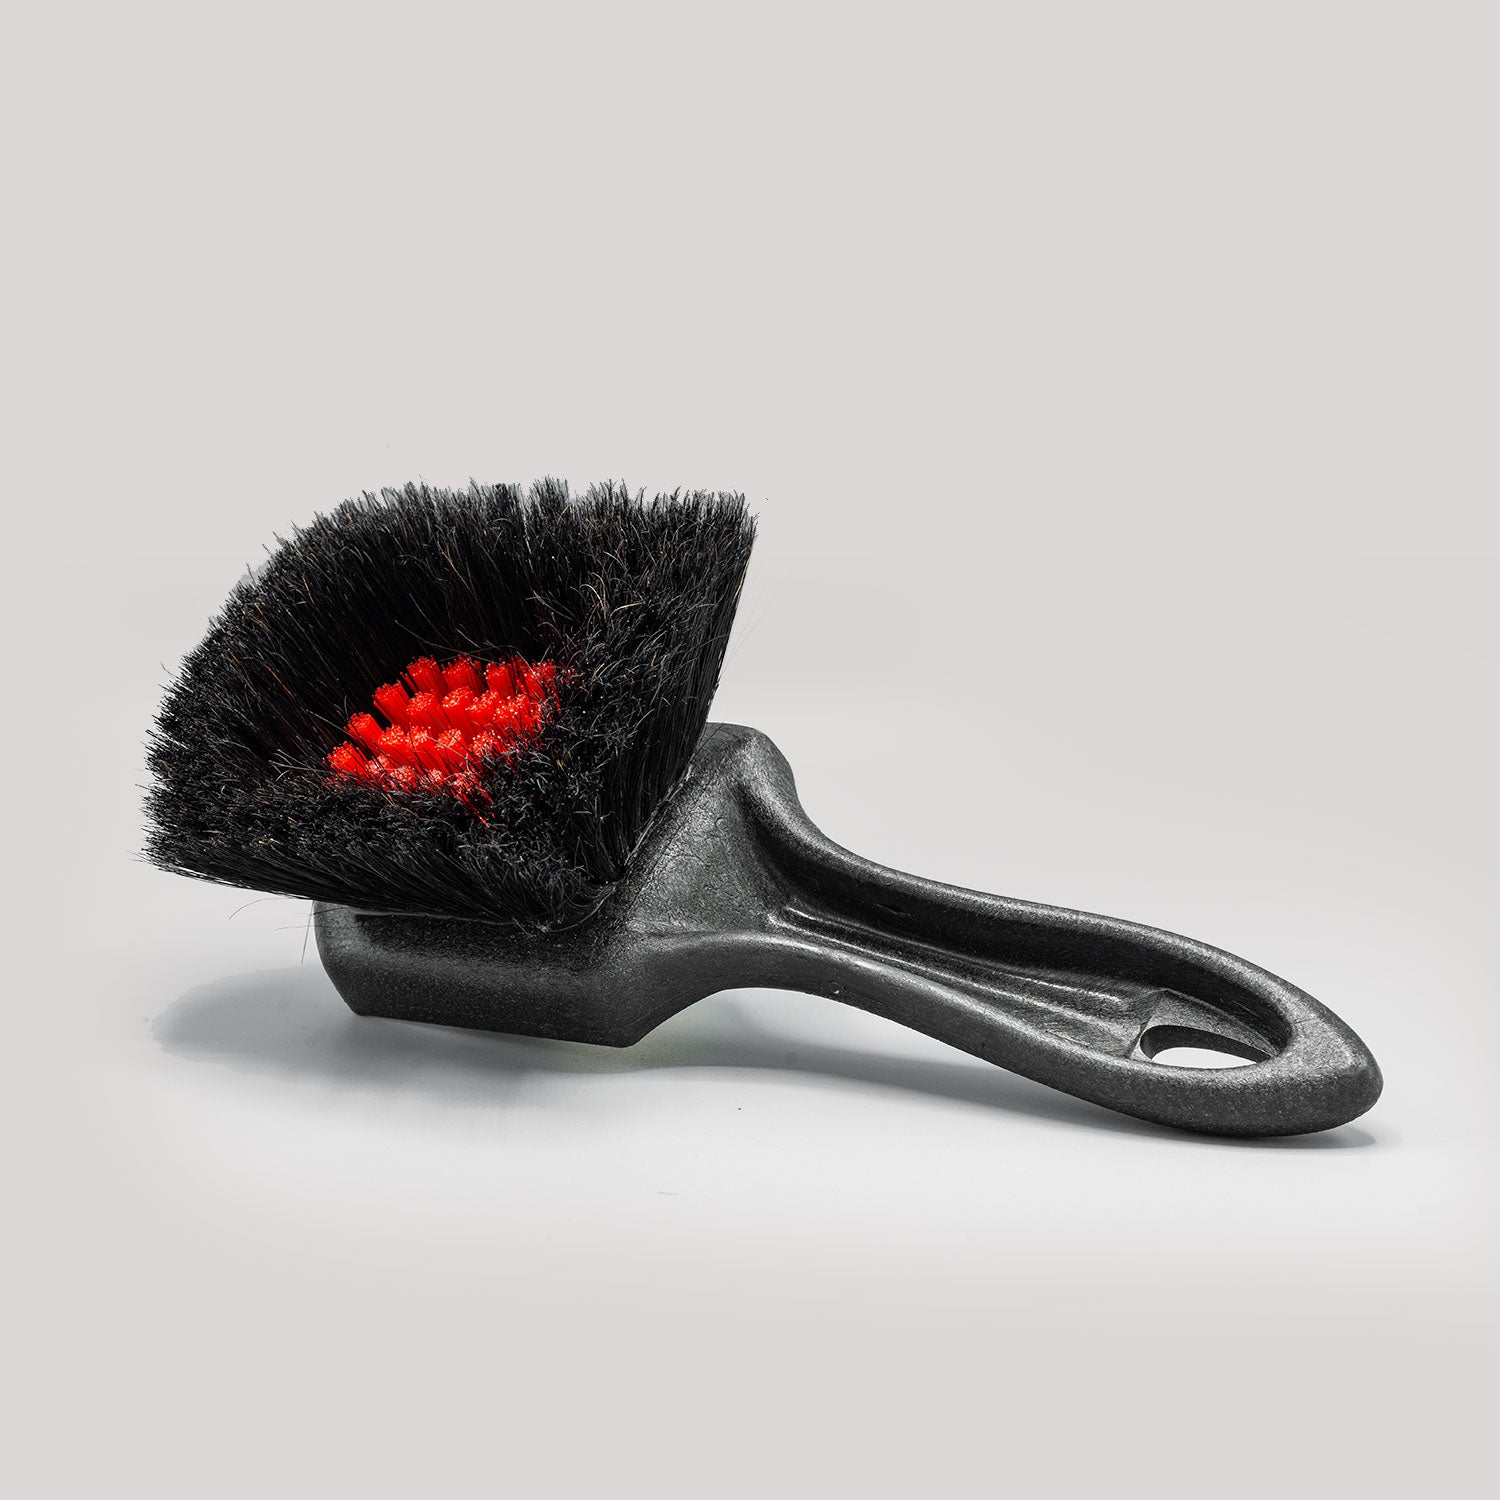 Heavy-Duty Wheel and Carpet Cleaning Brush - Detailing Brushes